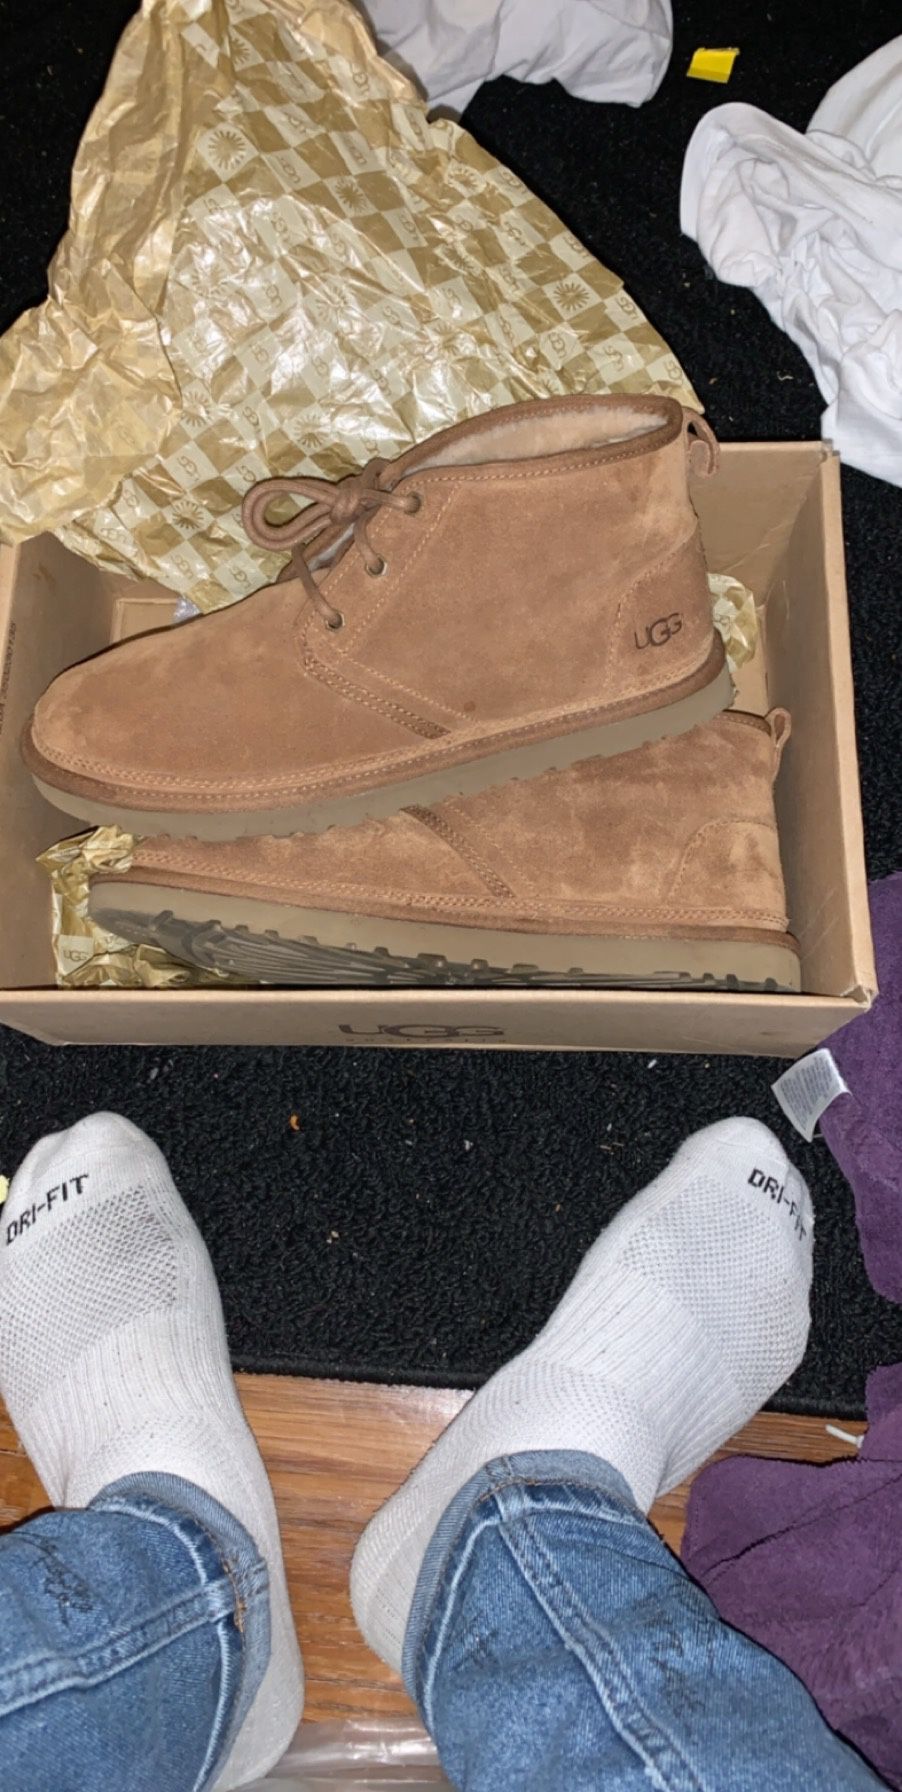 Brand new size 11 Ugg’s never worn